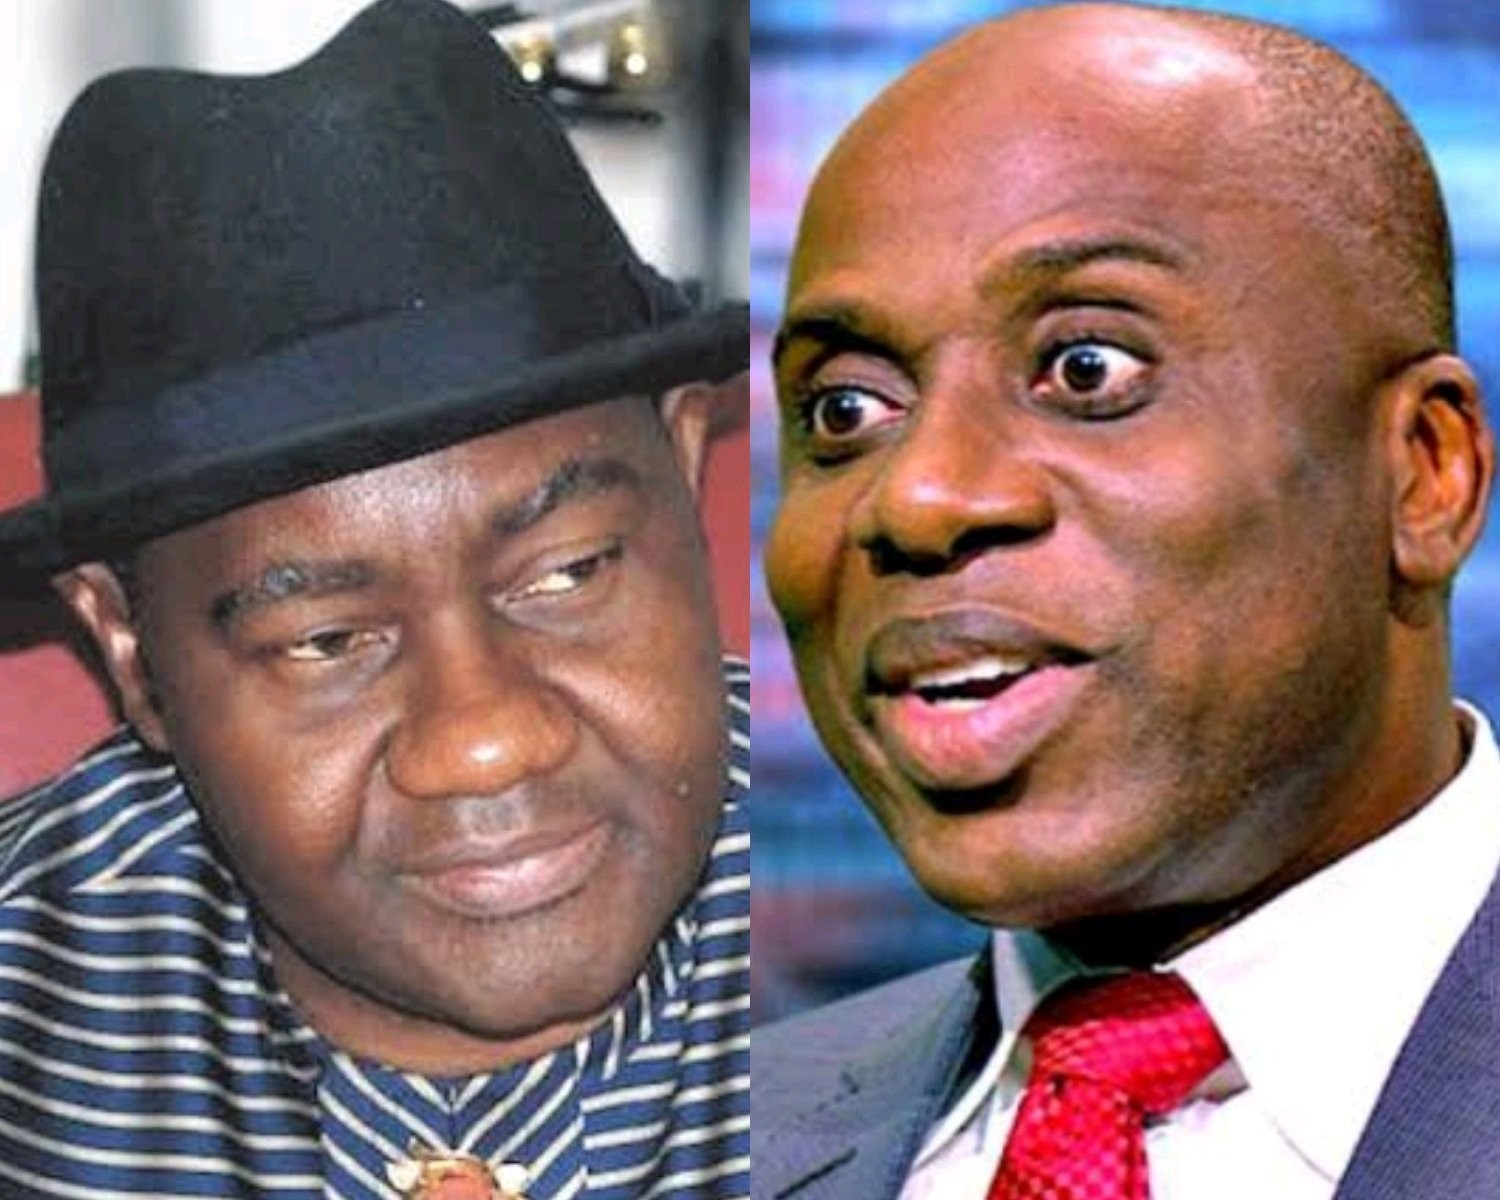 [JUST IN] Amaechi drove to my house in the presence of my wife in Abuja and told me he knew I could win an election but I should not dare to contest - According to Senator Magnus Abe